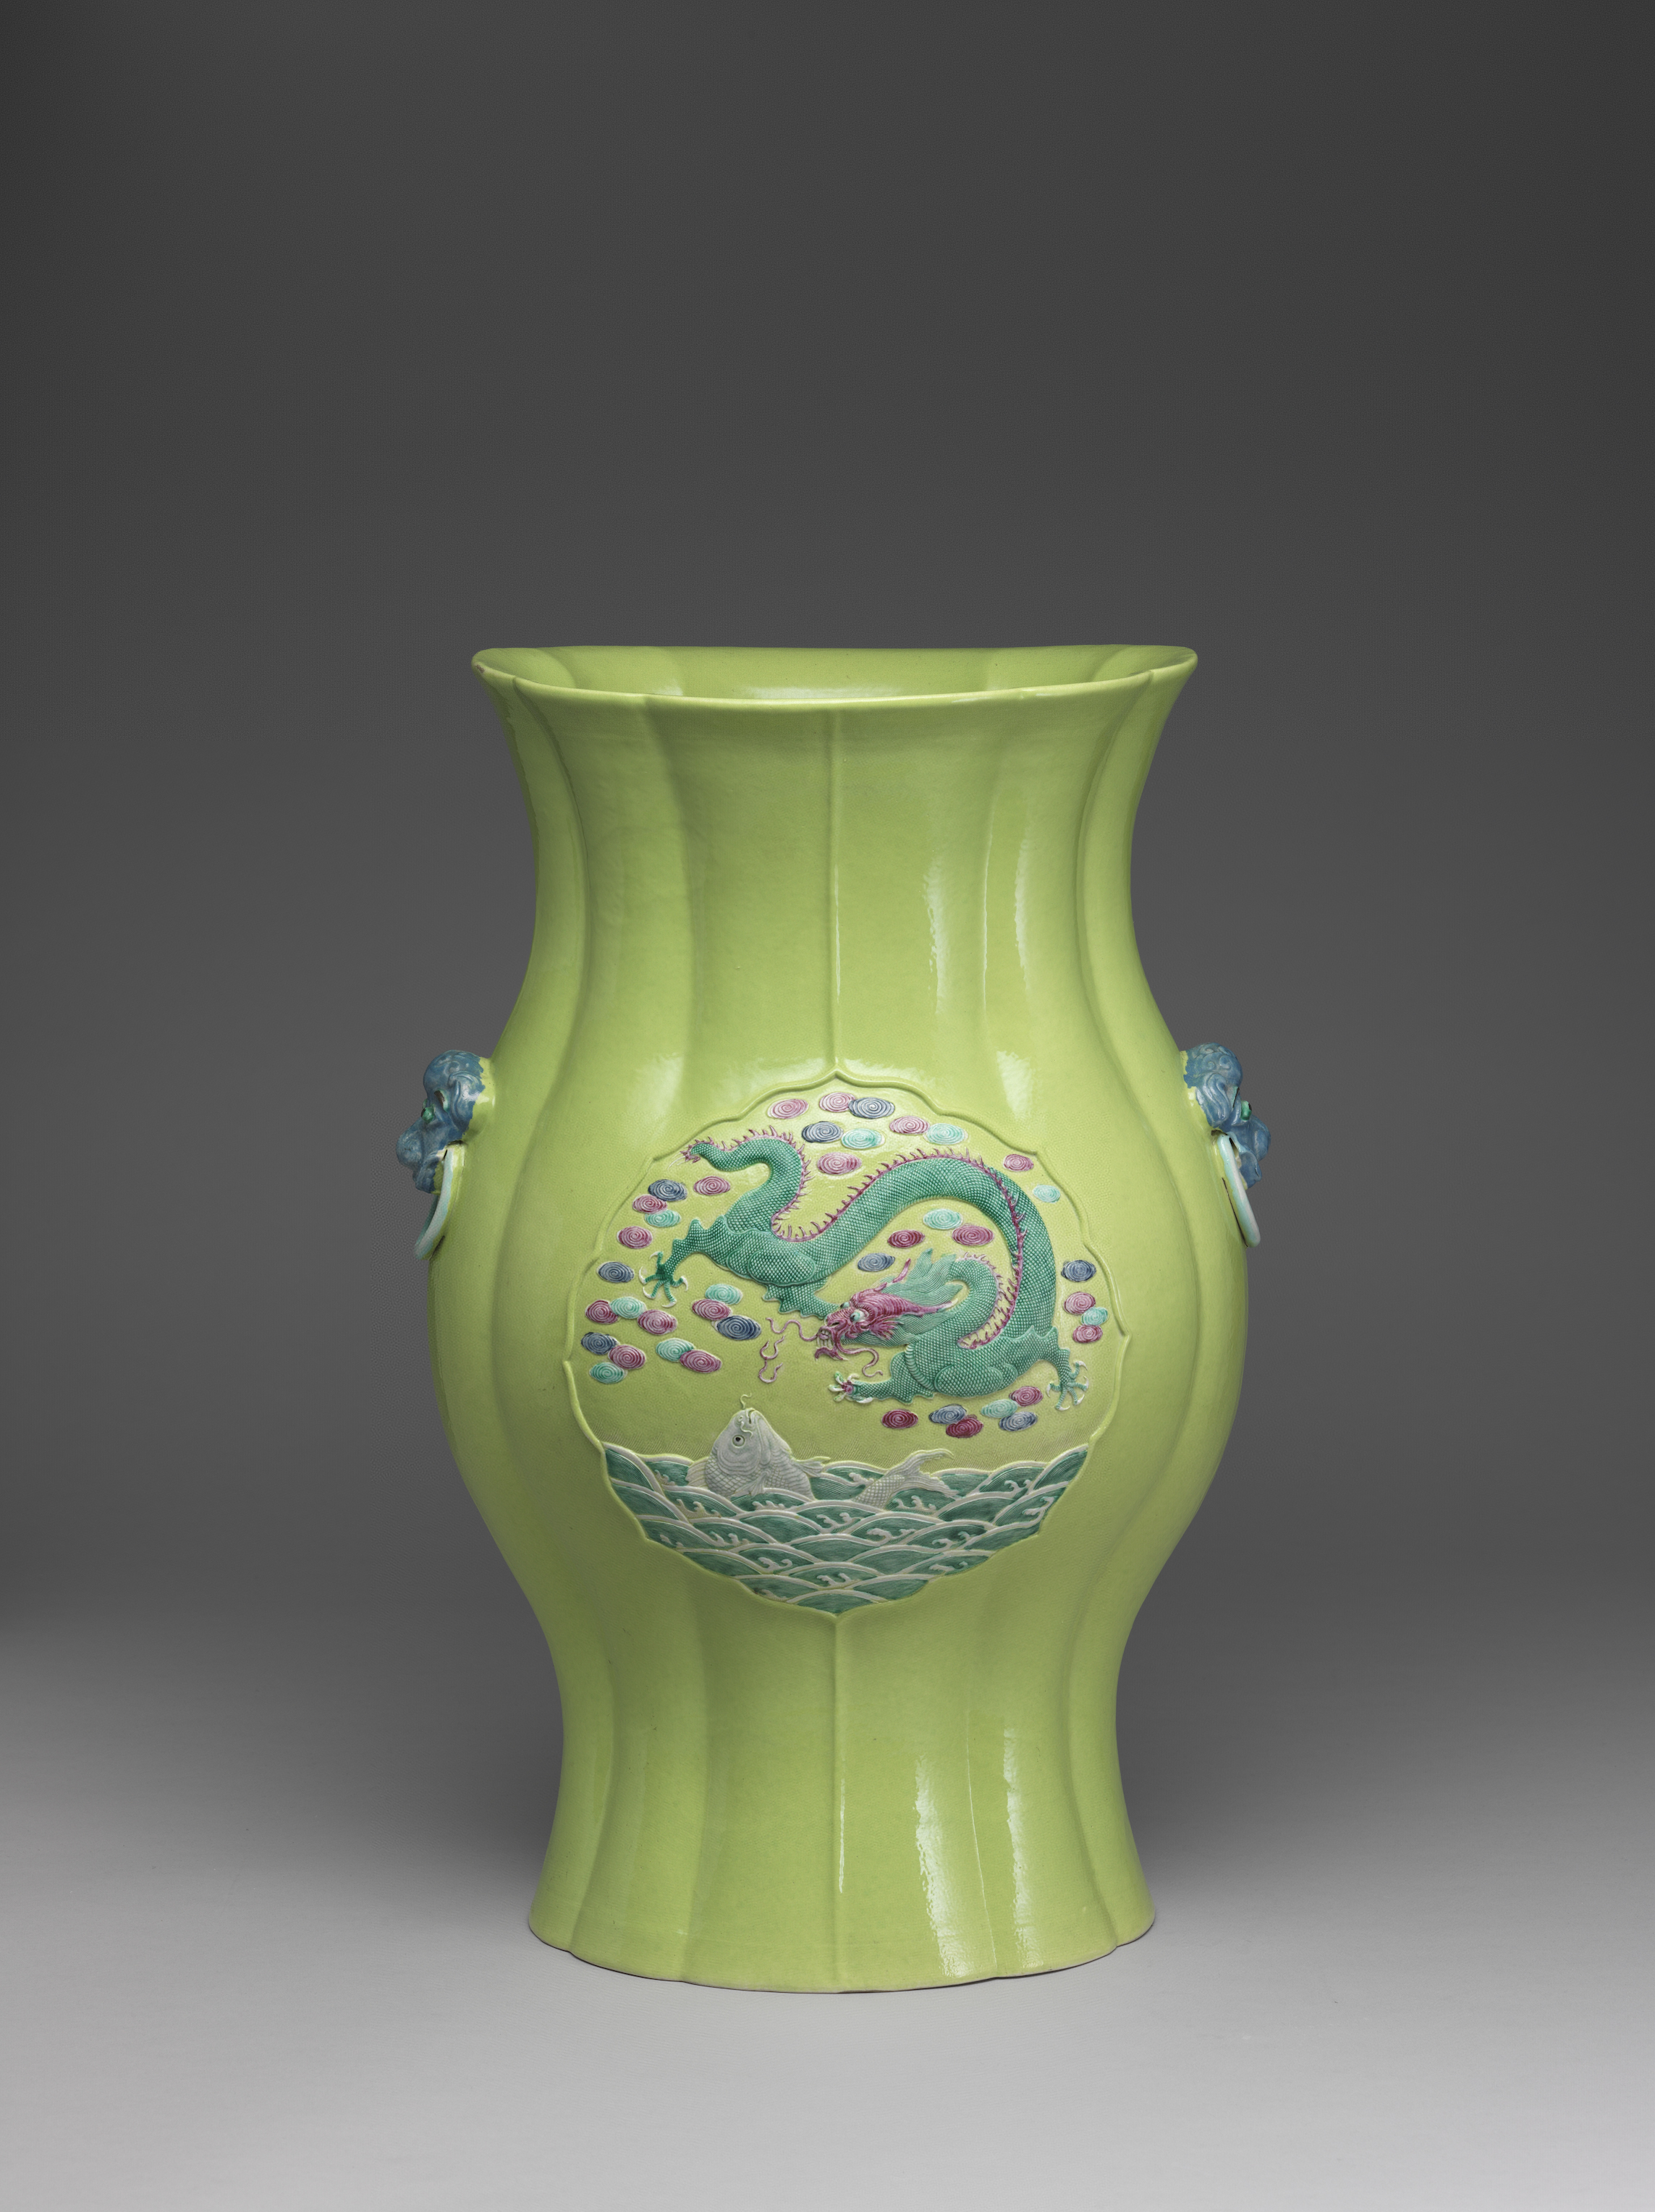 Other Ceramics in National Palace Museum, part3